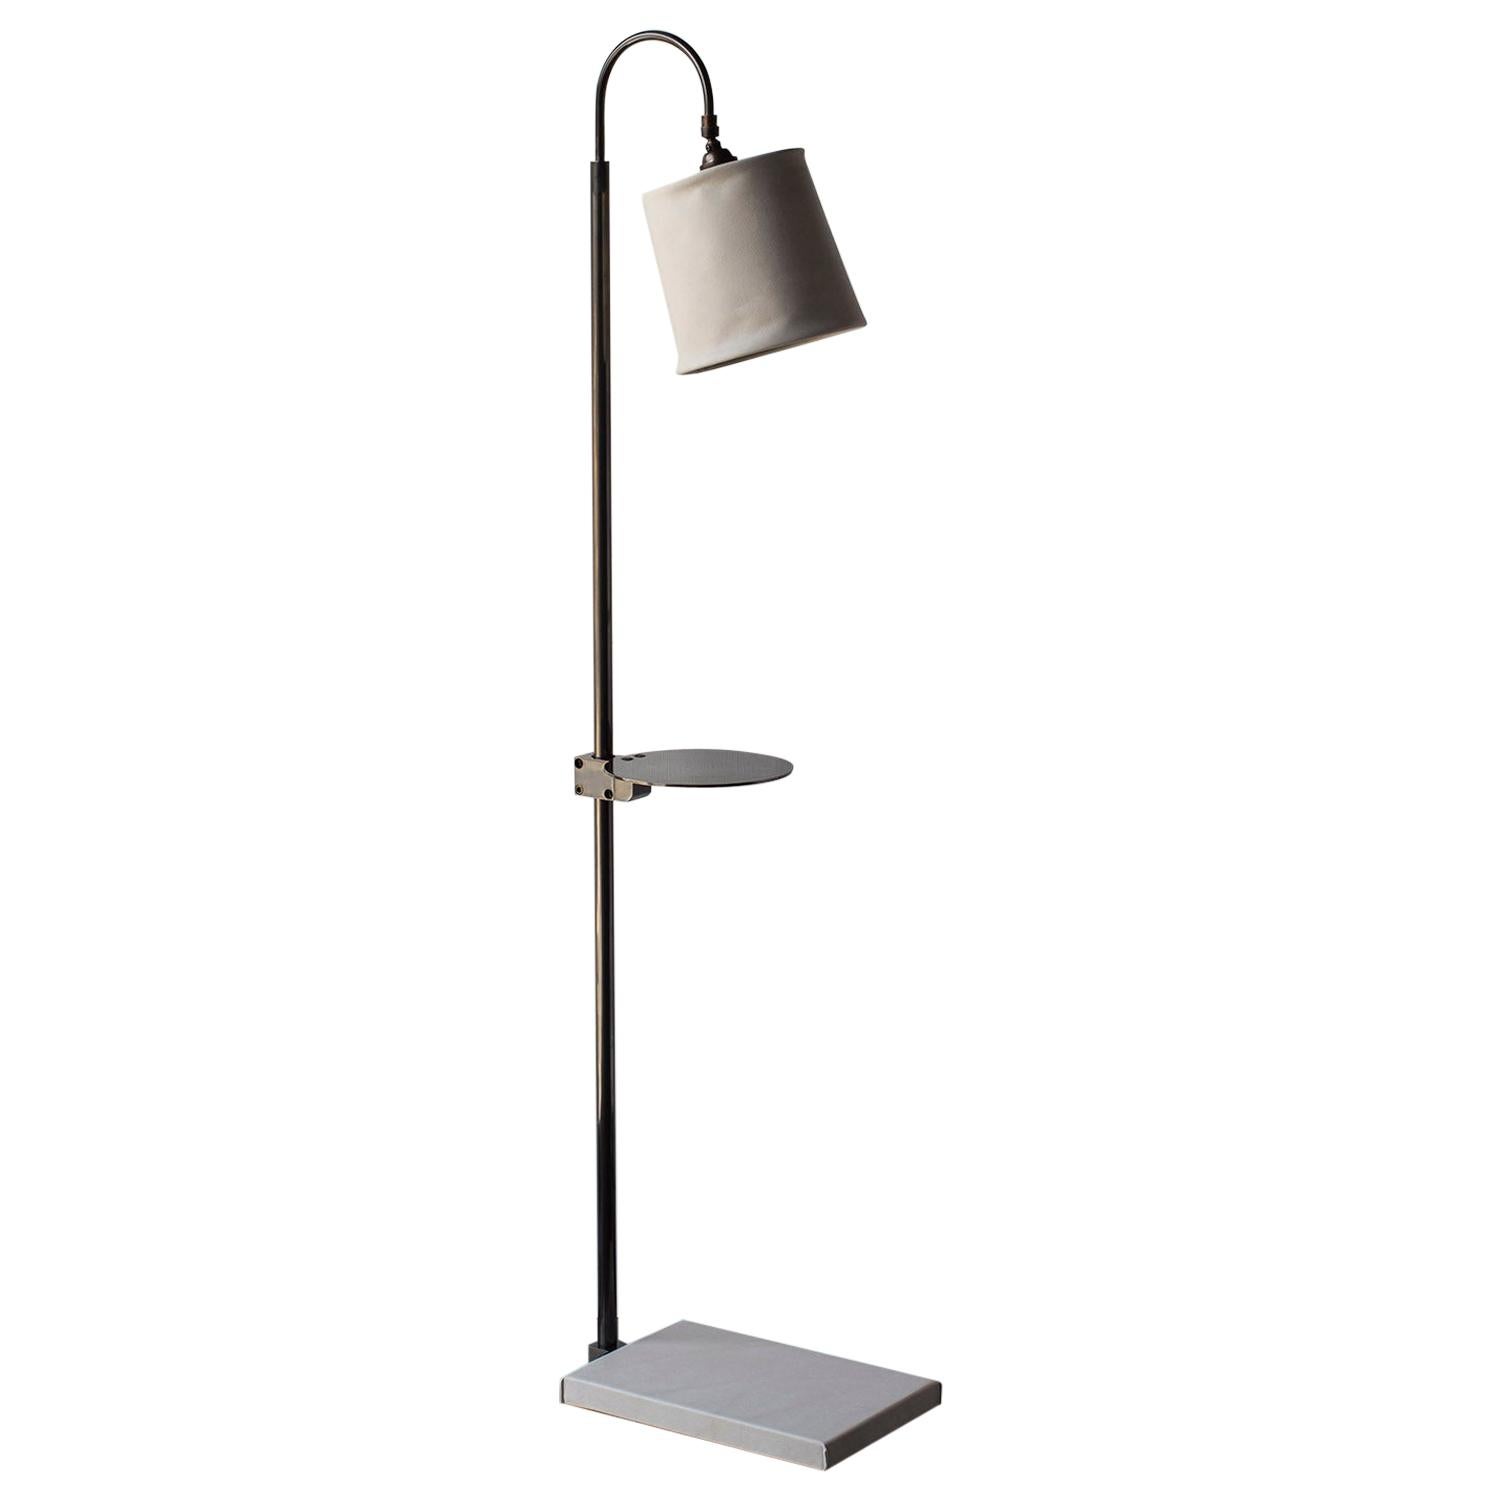 Series01 Floor Lamp, Drink Tray, Ash Gray Leather, Dark Patinated Brass